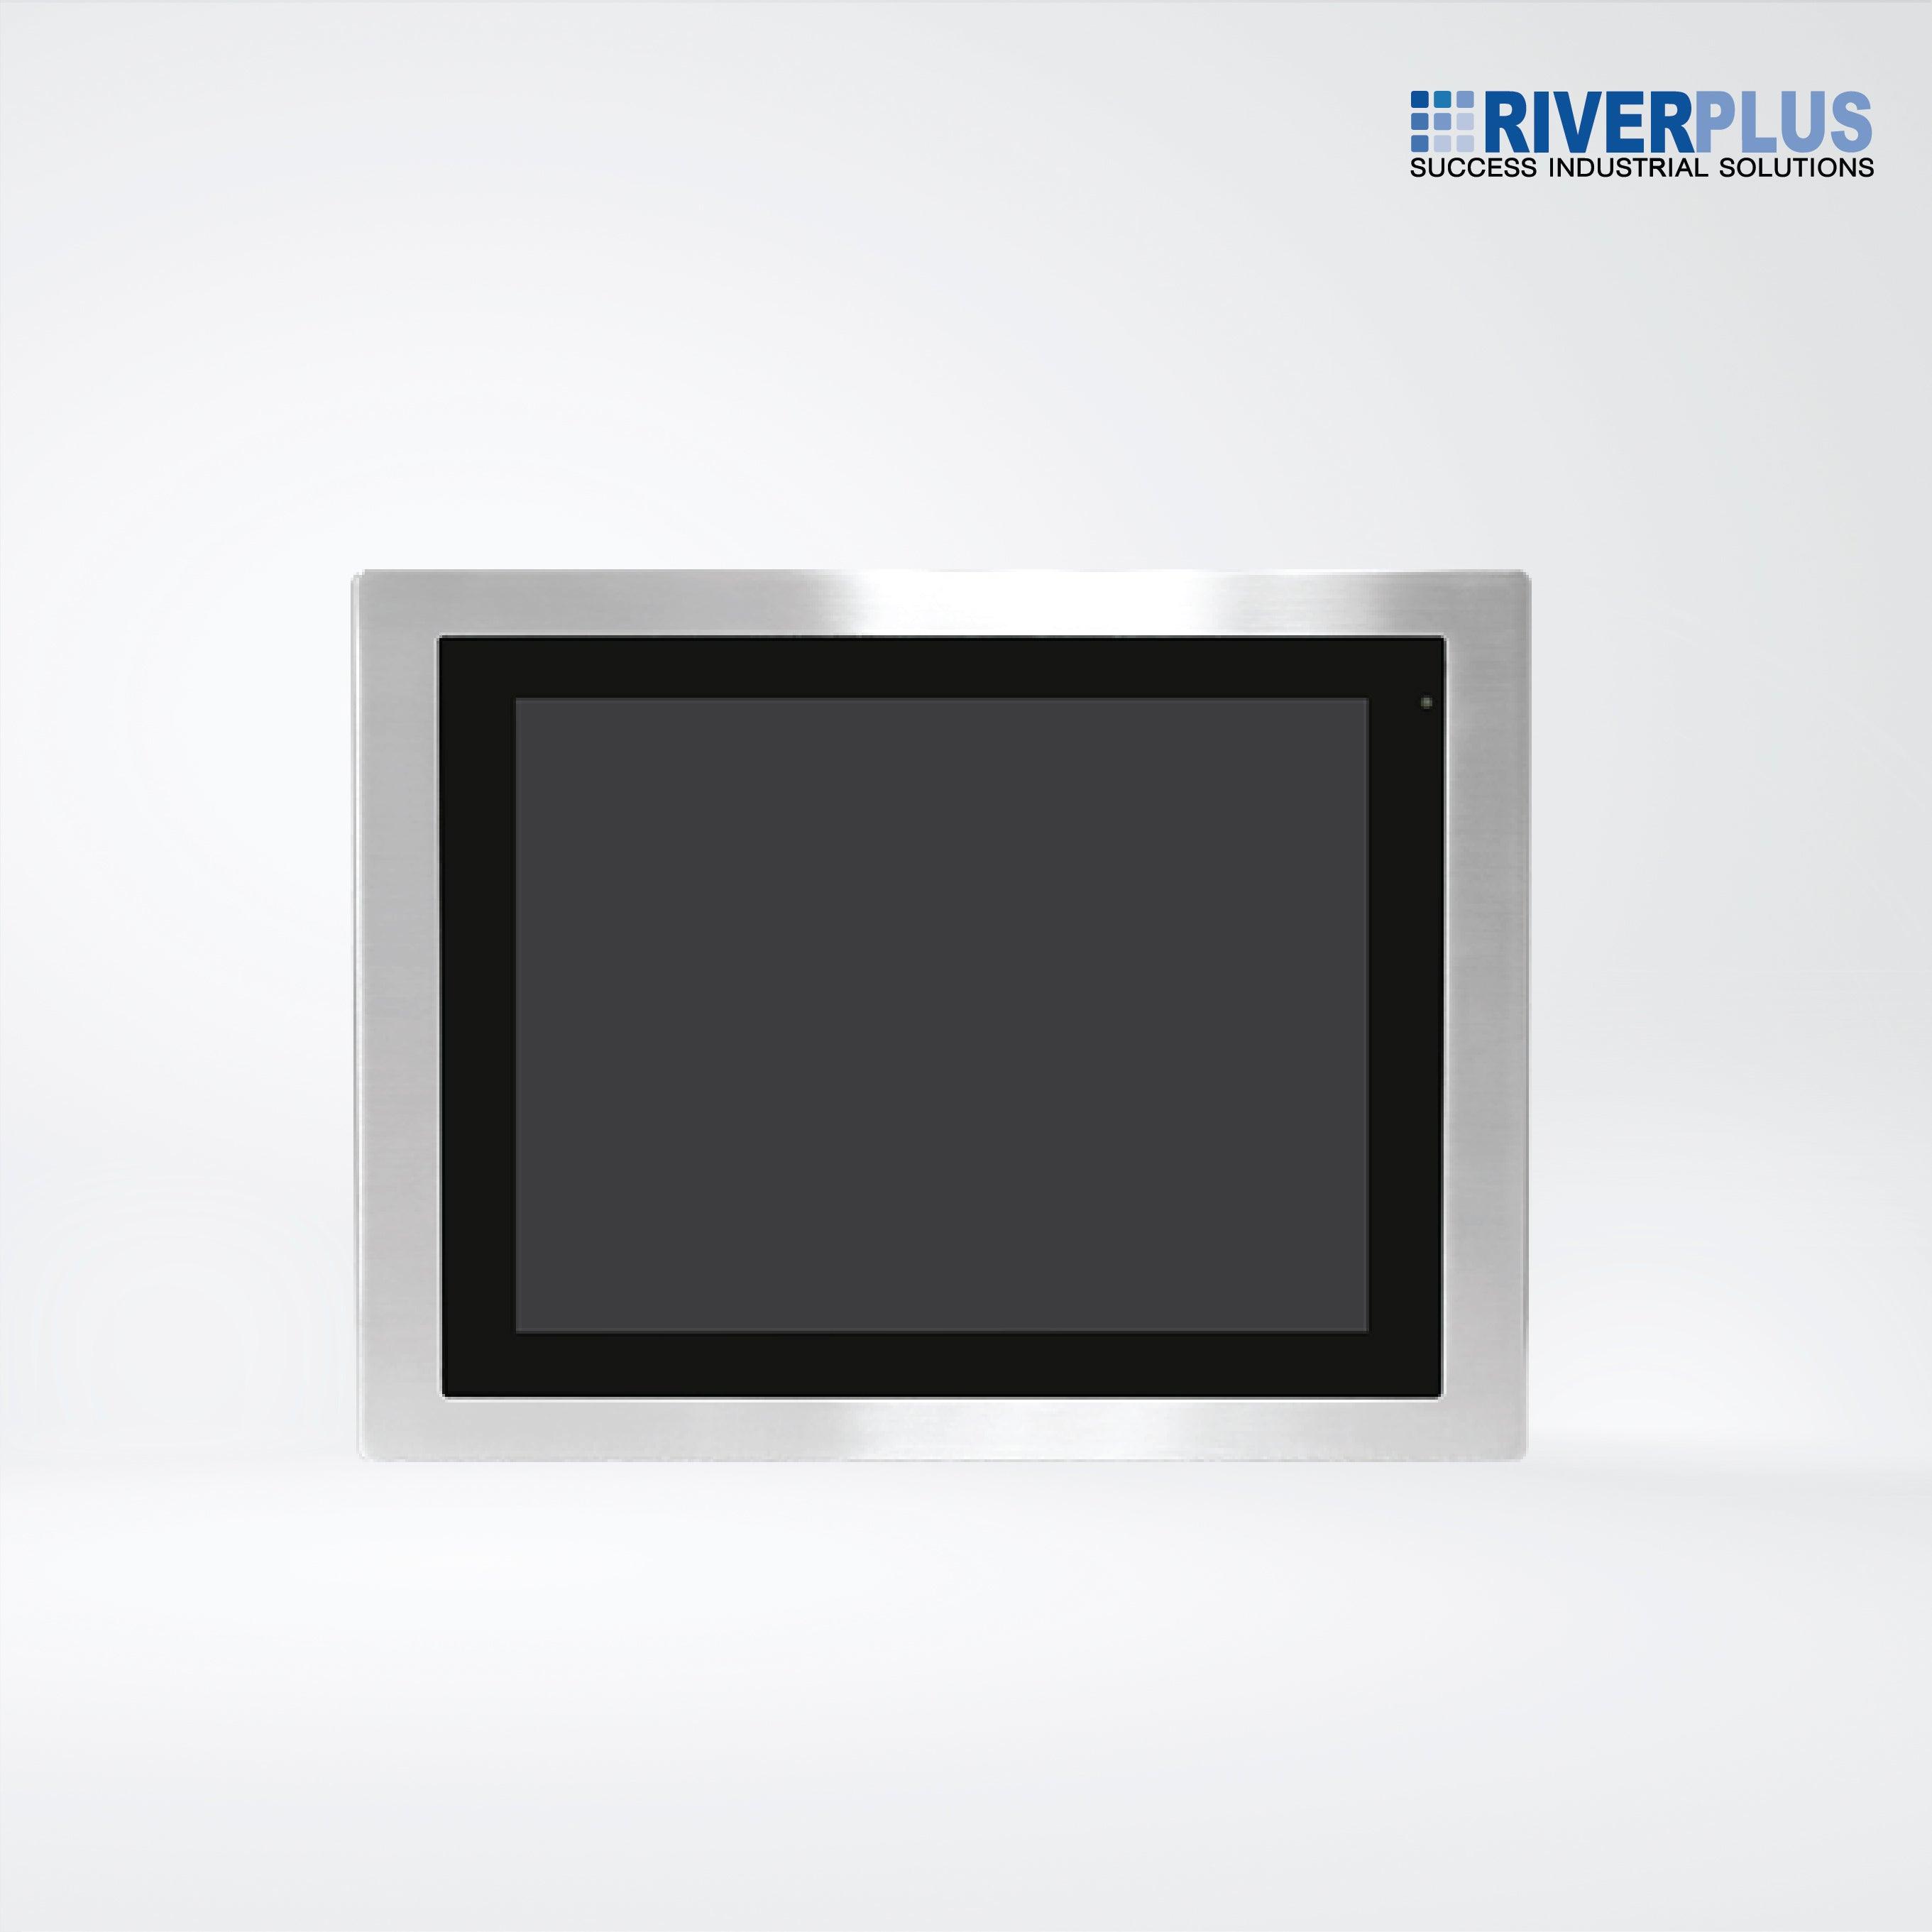 FABS-115P 15” Flat Front Panel IP66 Stainless Chassis Display - Riverplus